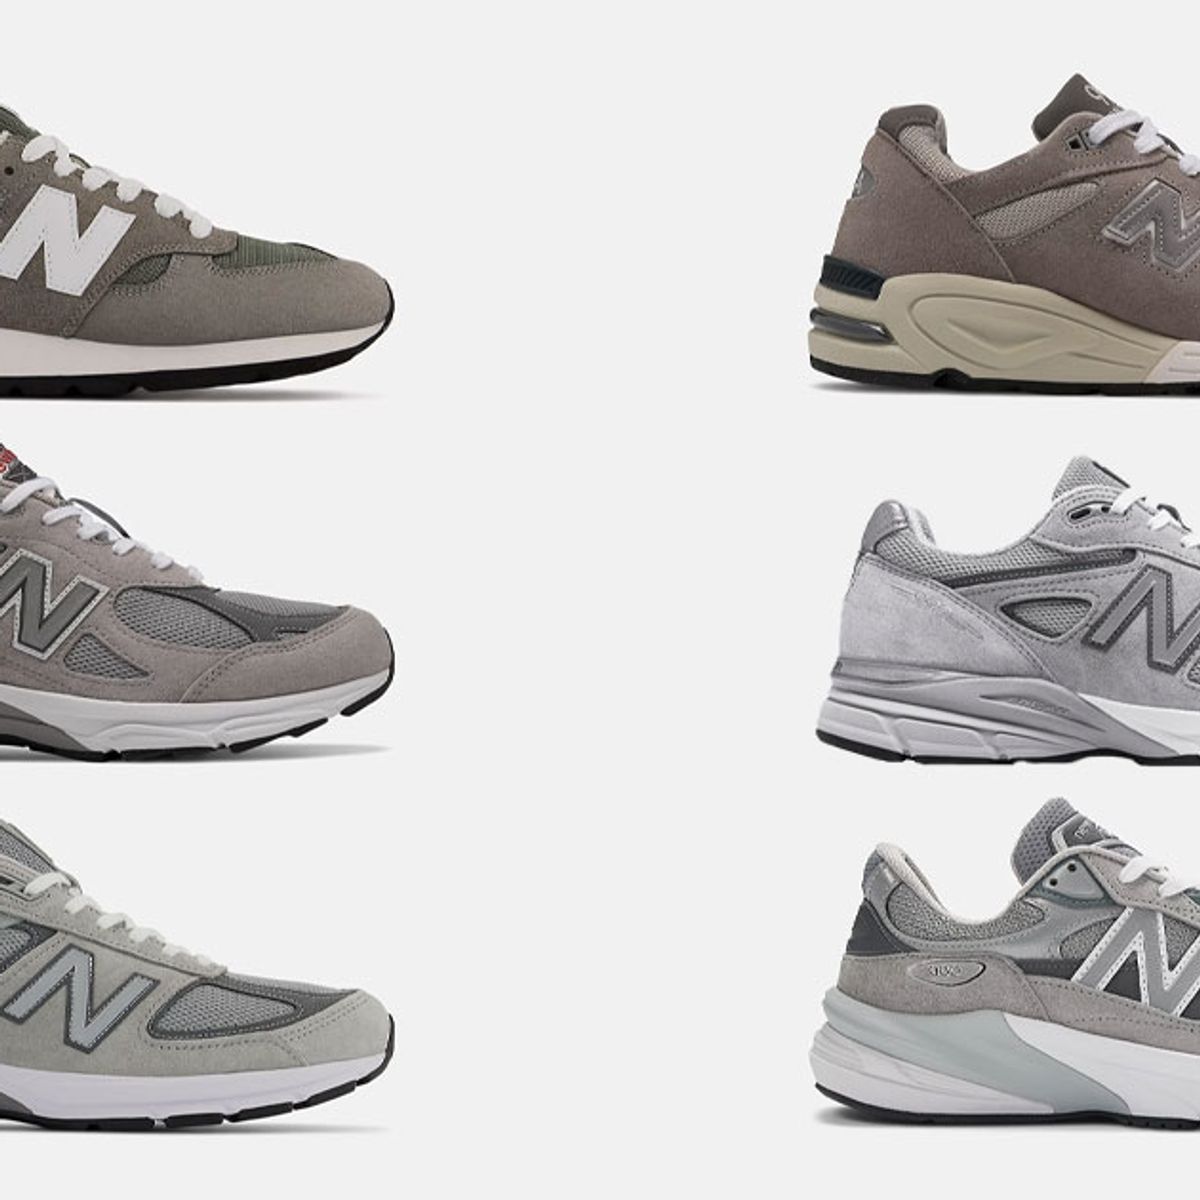 New Balance 990v3 Vs V5: What’s The Difference In 2023? - Shoe Effect